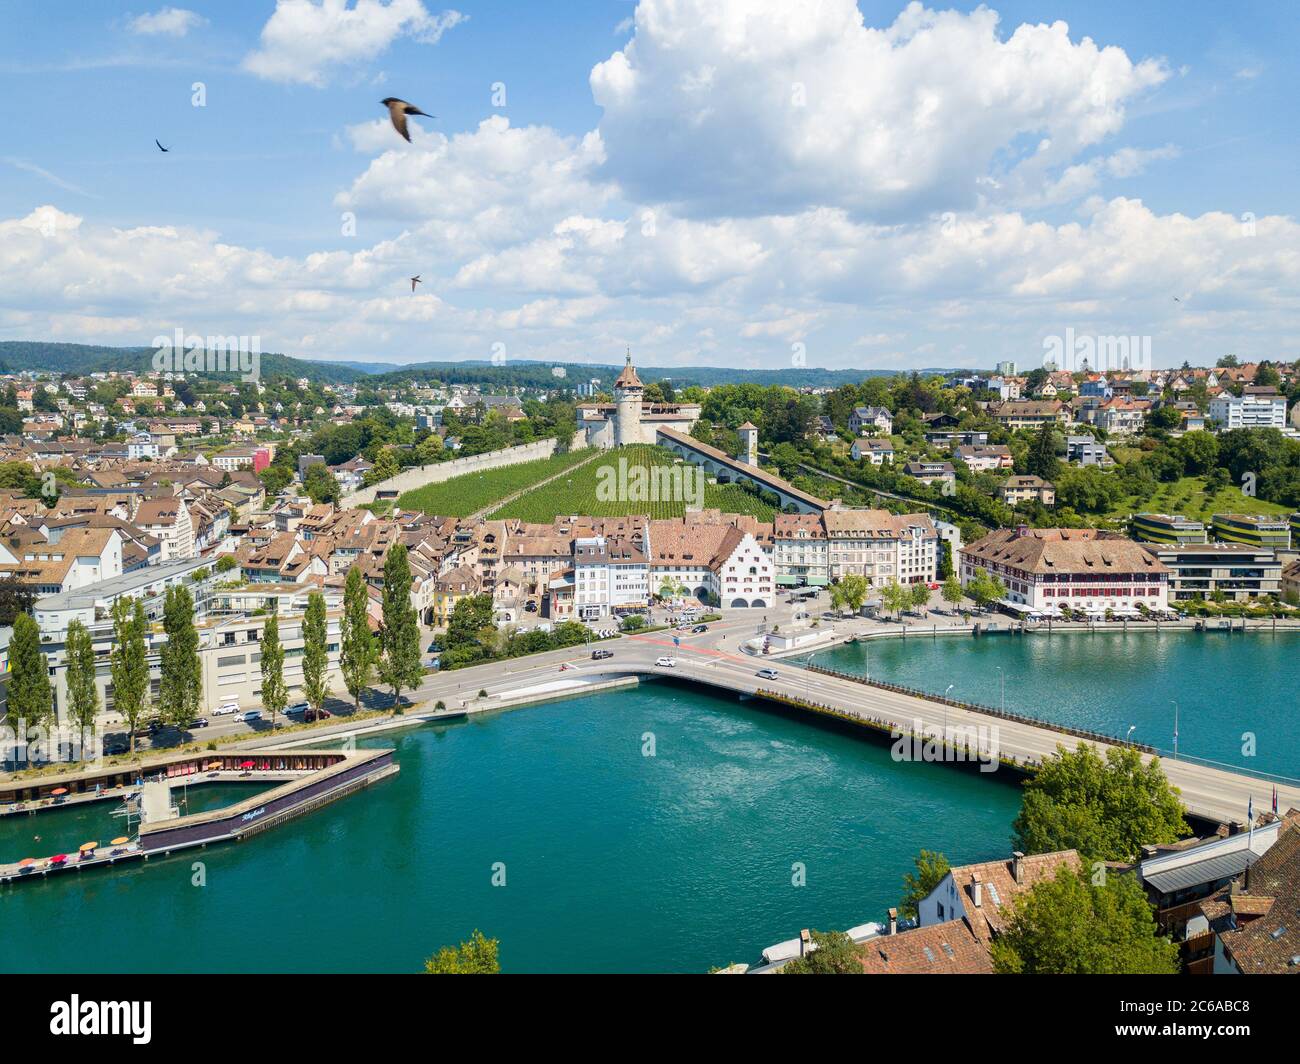 Schaffhausen, Switzerland - 14 July 2018: Aerial view of the Swiss old town Schaffhausen, with the medival castle Munot over the Rhine river. Munot is Stock Photo